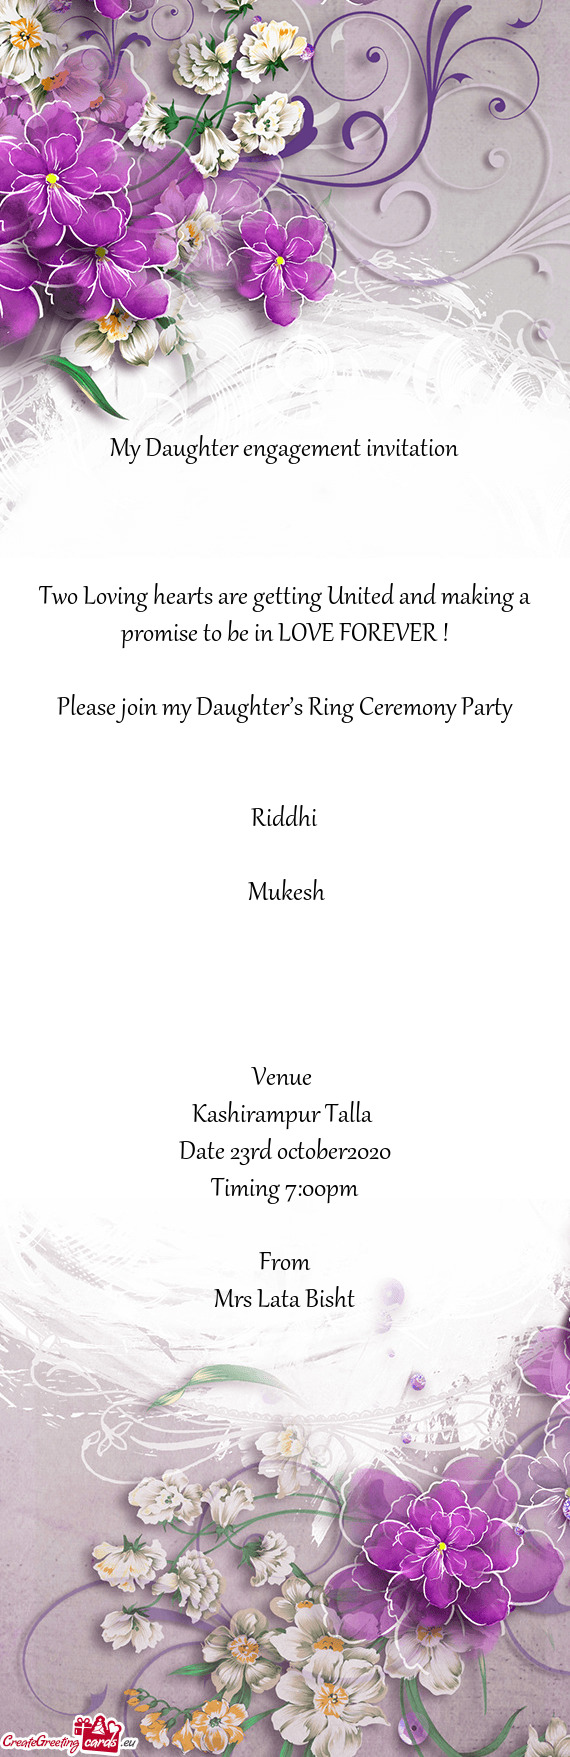 To be in LOVE FOREVER !
 
 Please join my Daughter’s Ring Ceremony Party
 
 
 Riddhi
 
 Mukesh